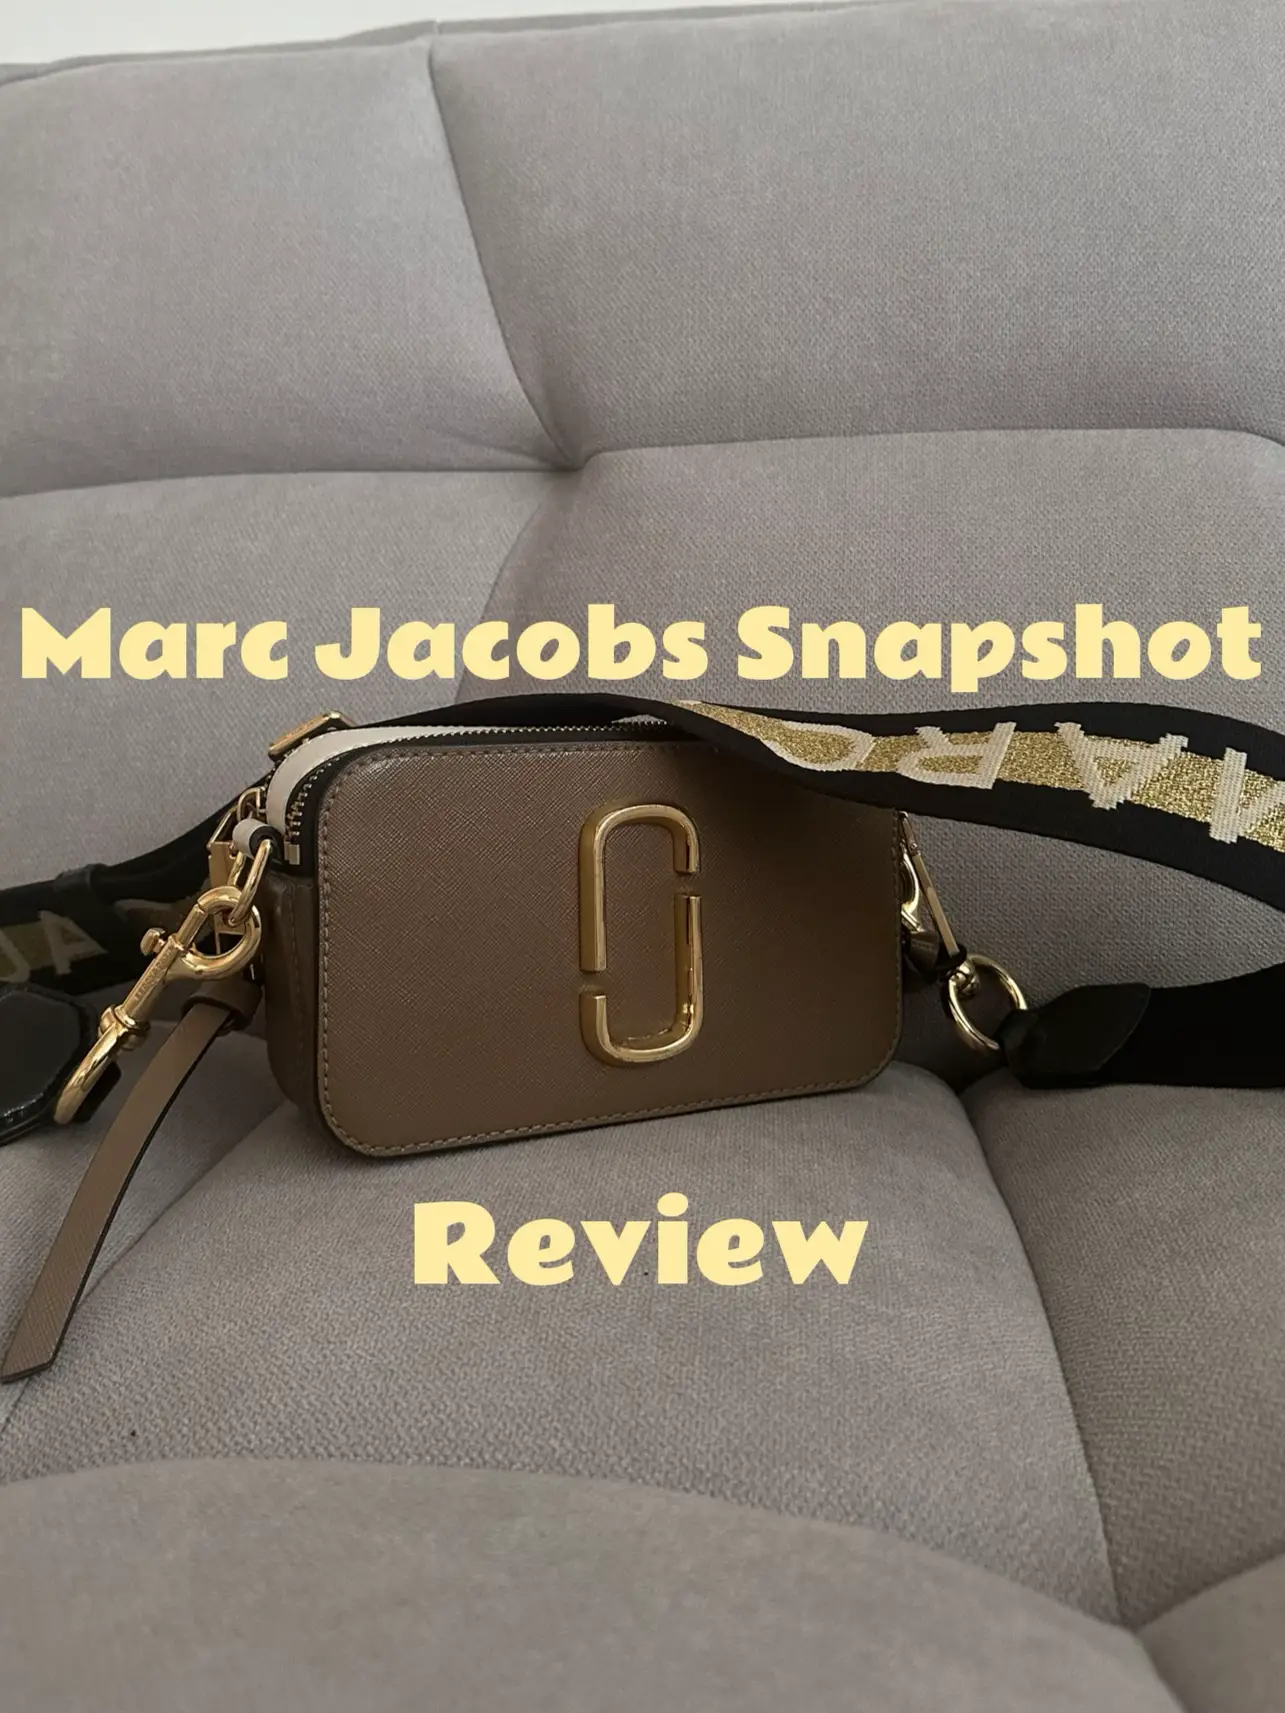 MARC JACOBS SNAPSHOT BAG unboxing & review